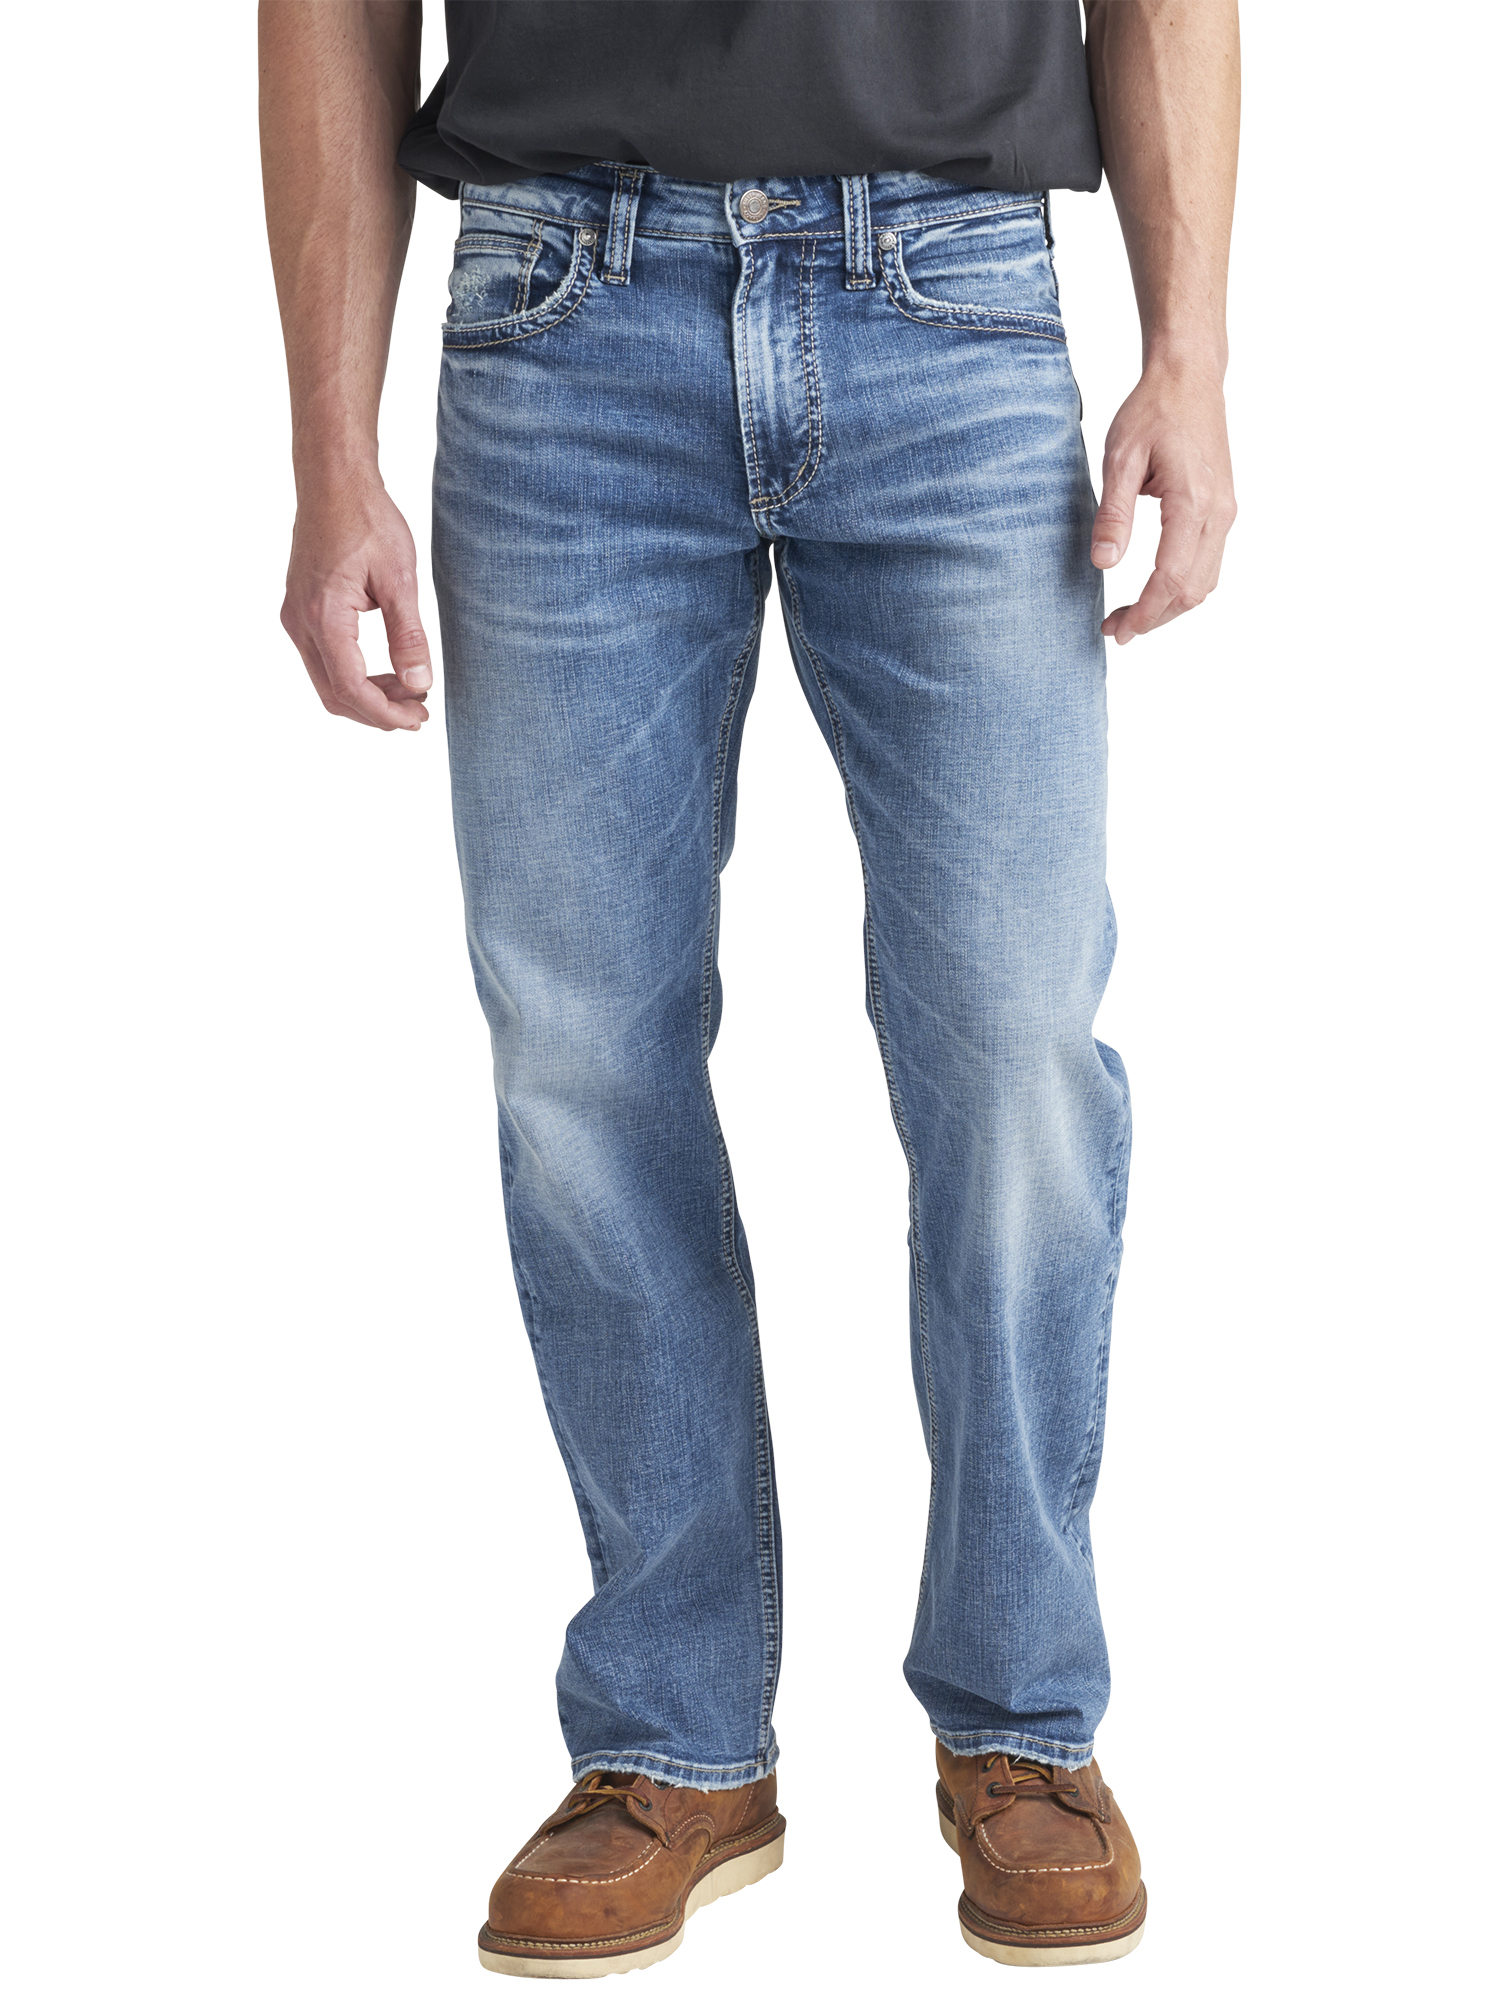 Silver Jeans Co. Men's Zac Relaxed Fit Straight Leg Jeans, Waist sizes ...